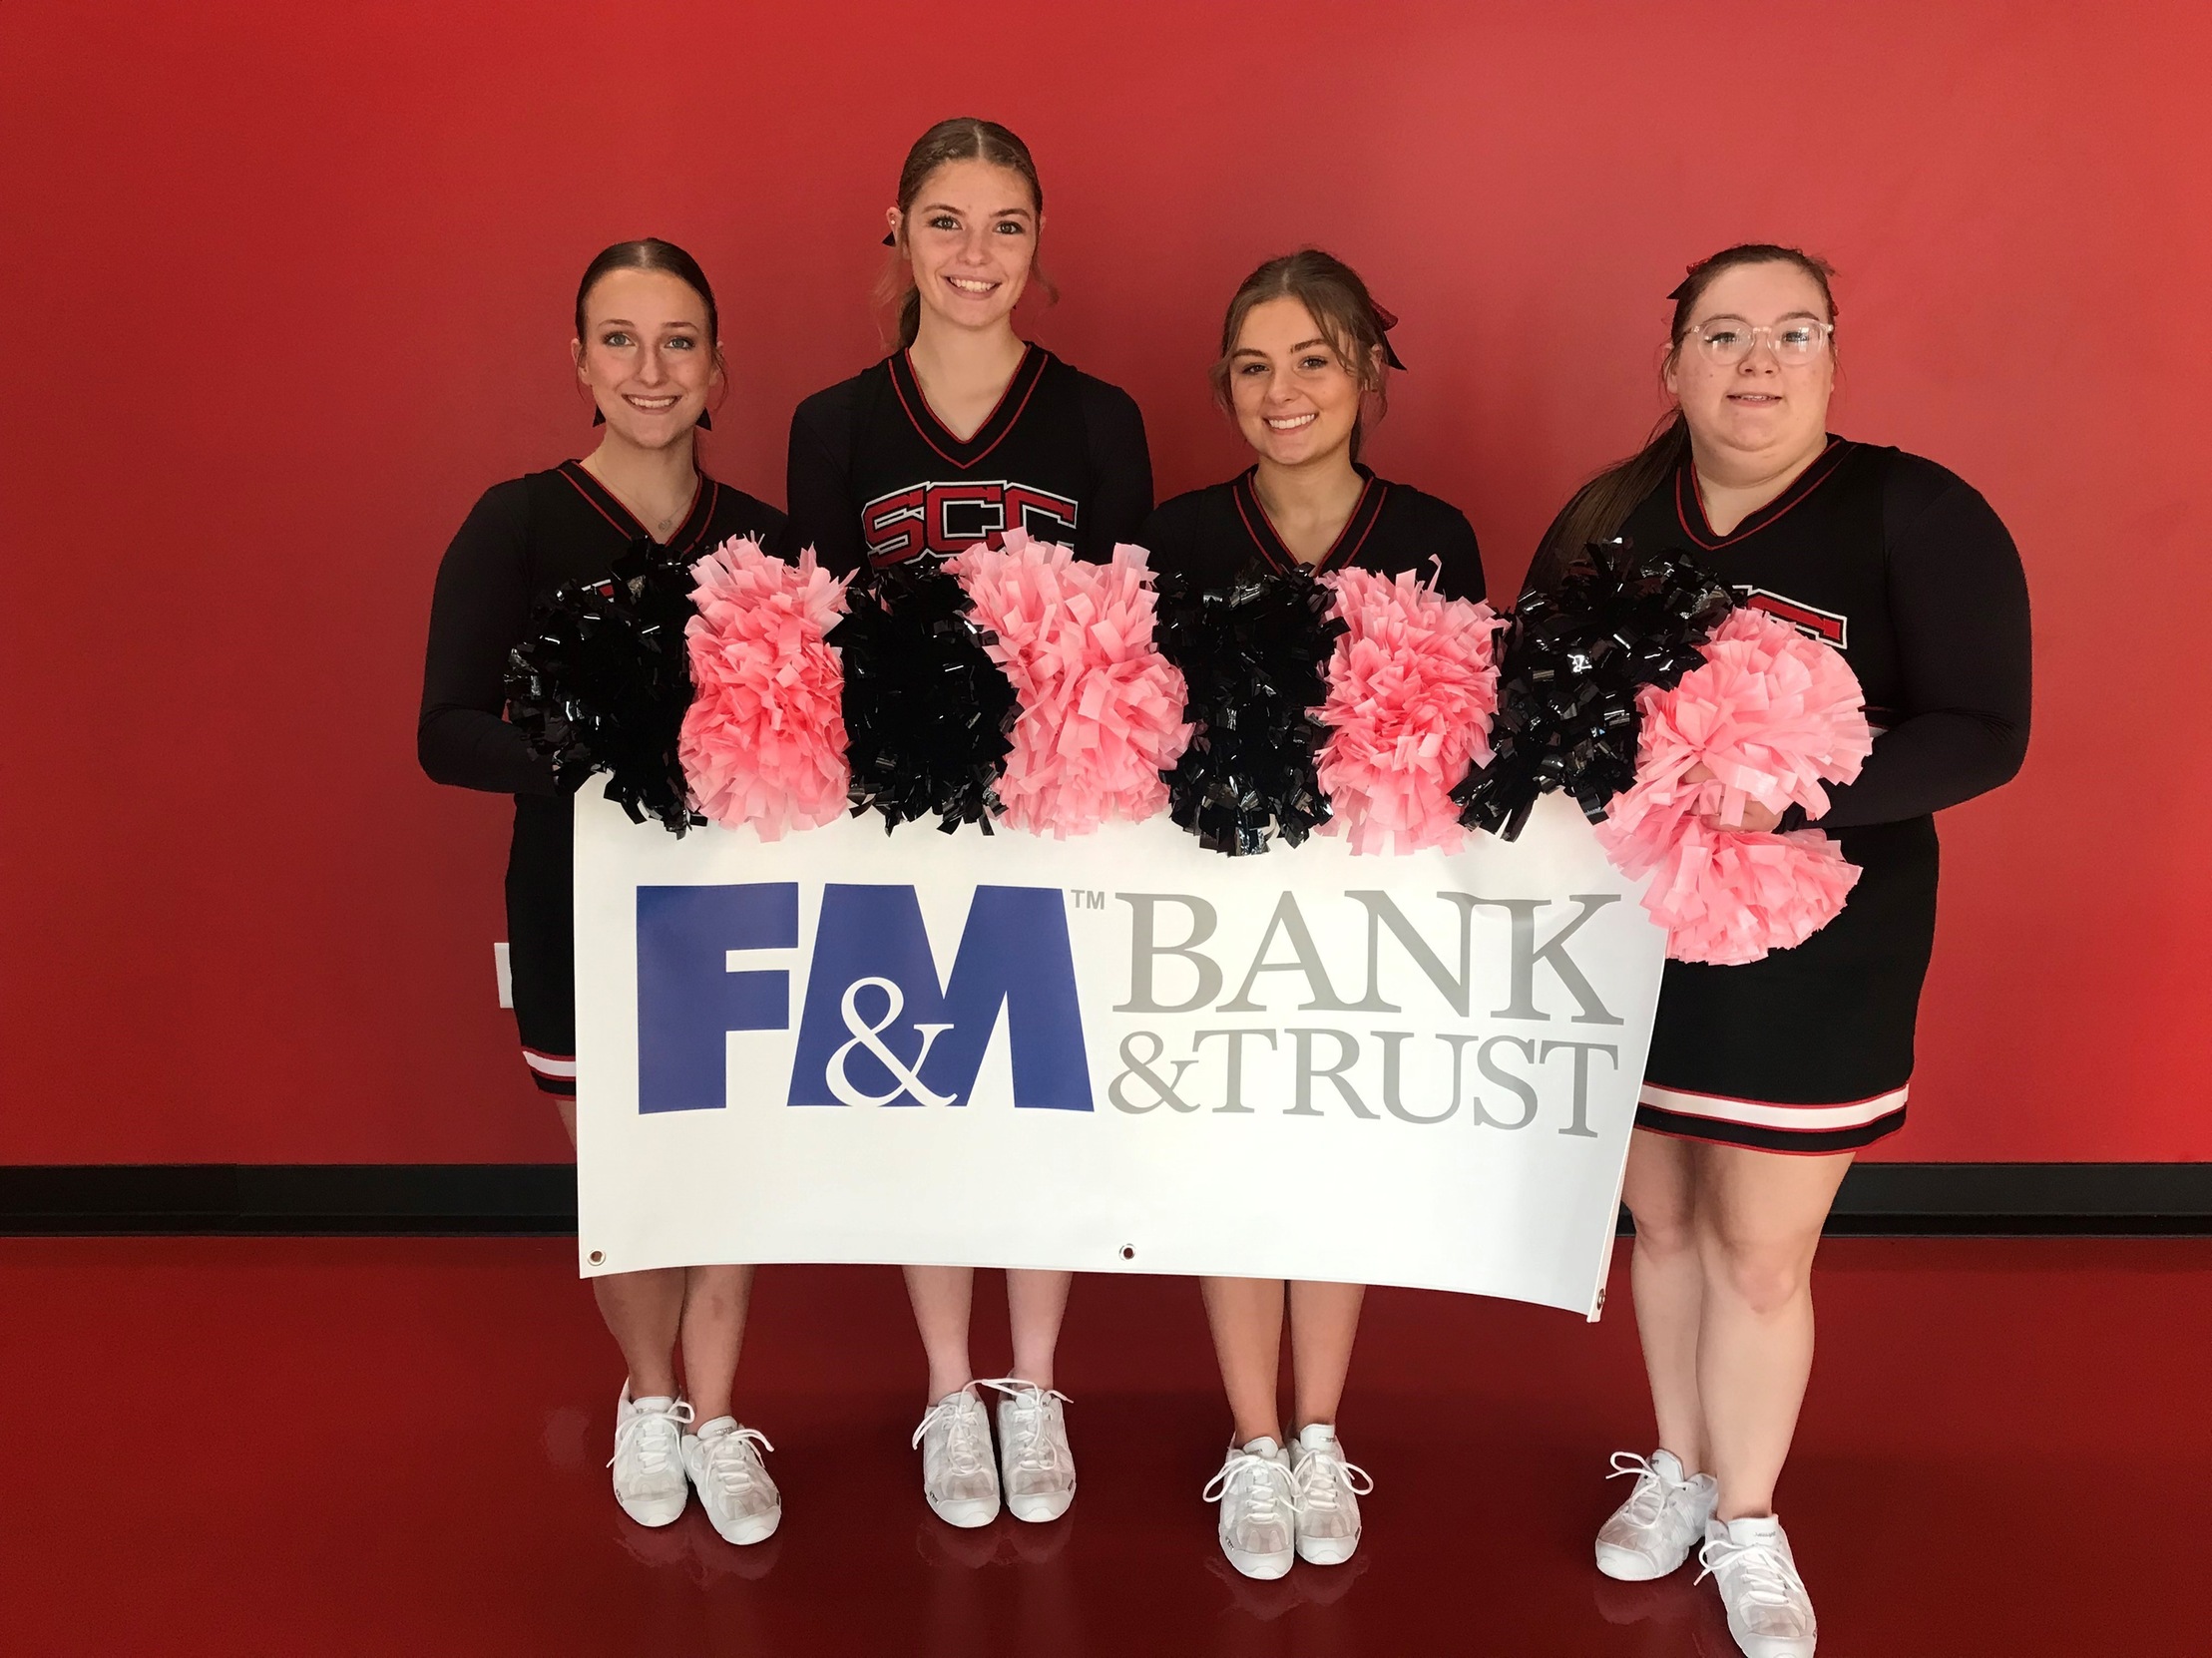 THANK YOU TO F&M BANK & TRUST FOR YOUR SPONSORSHIP